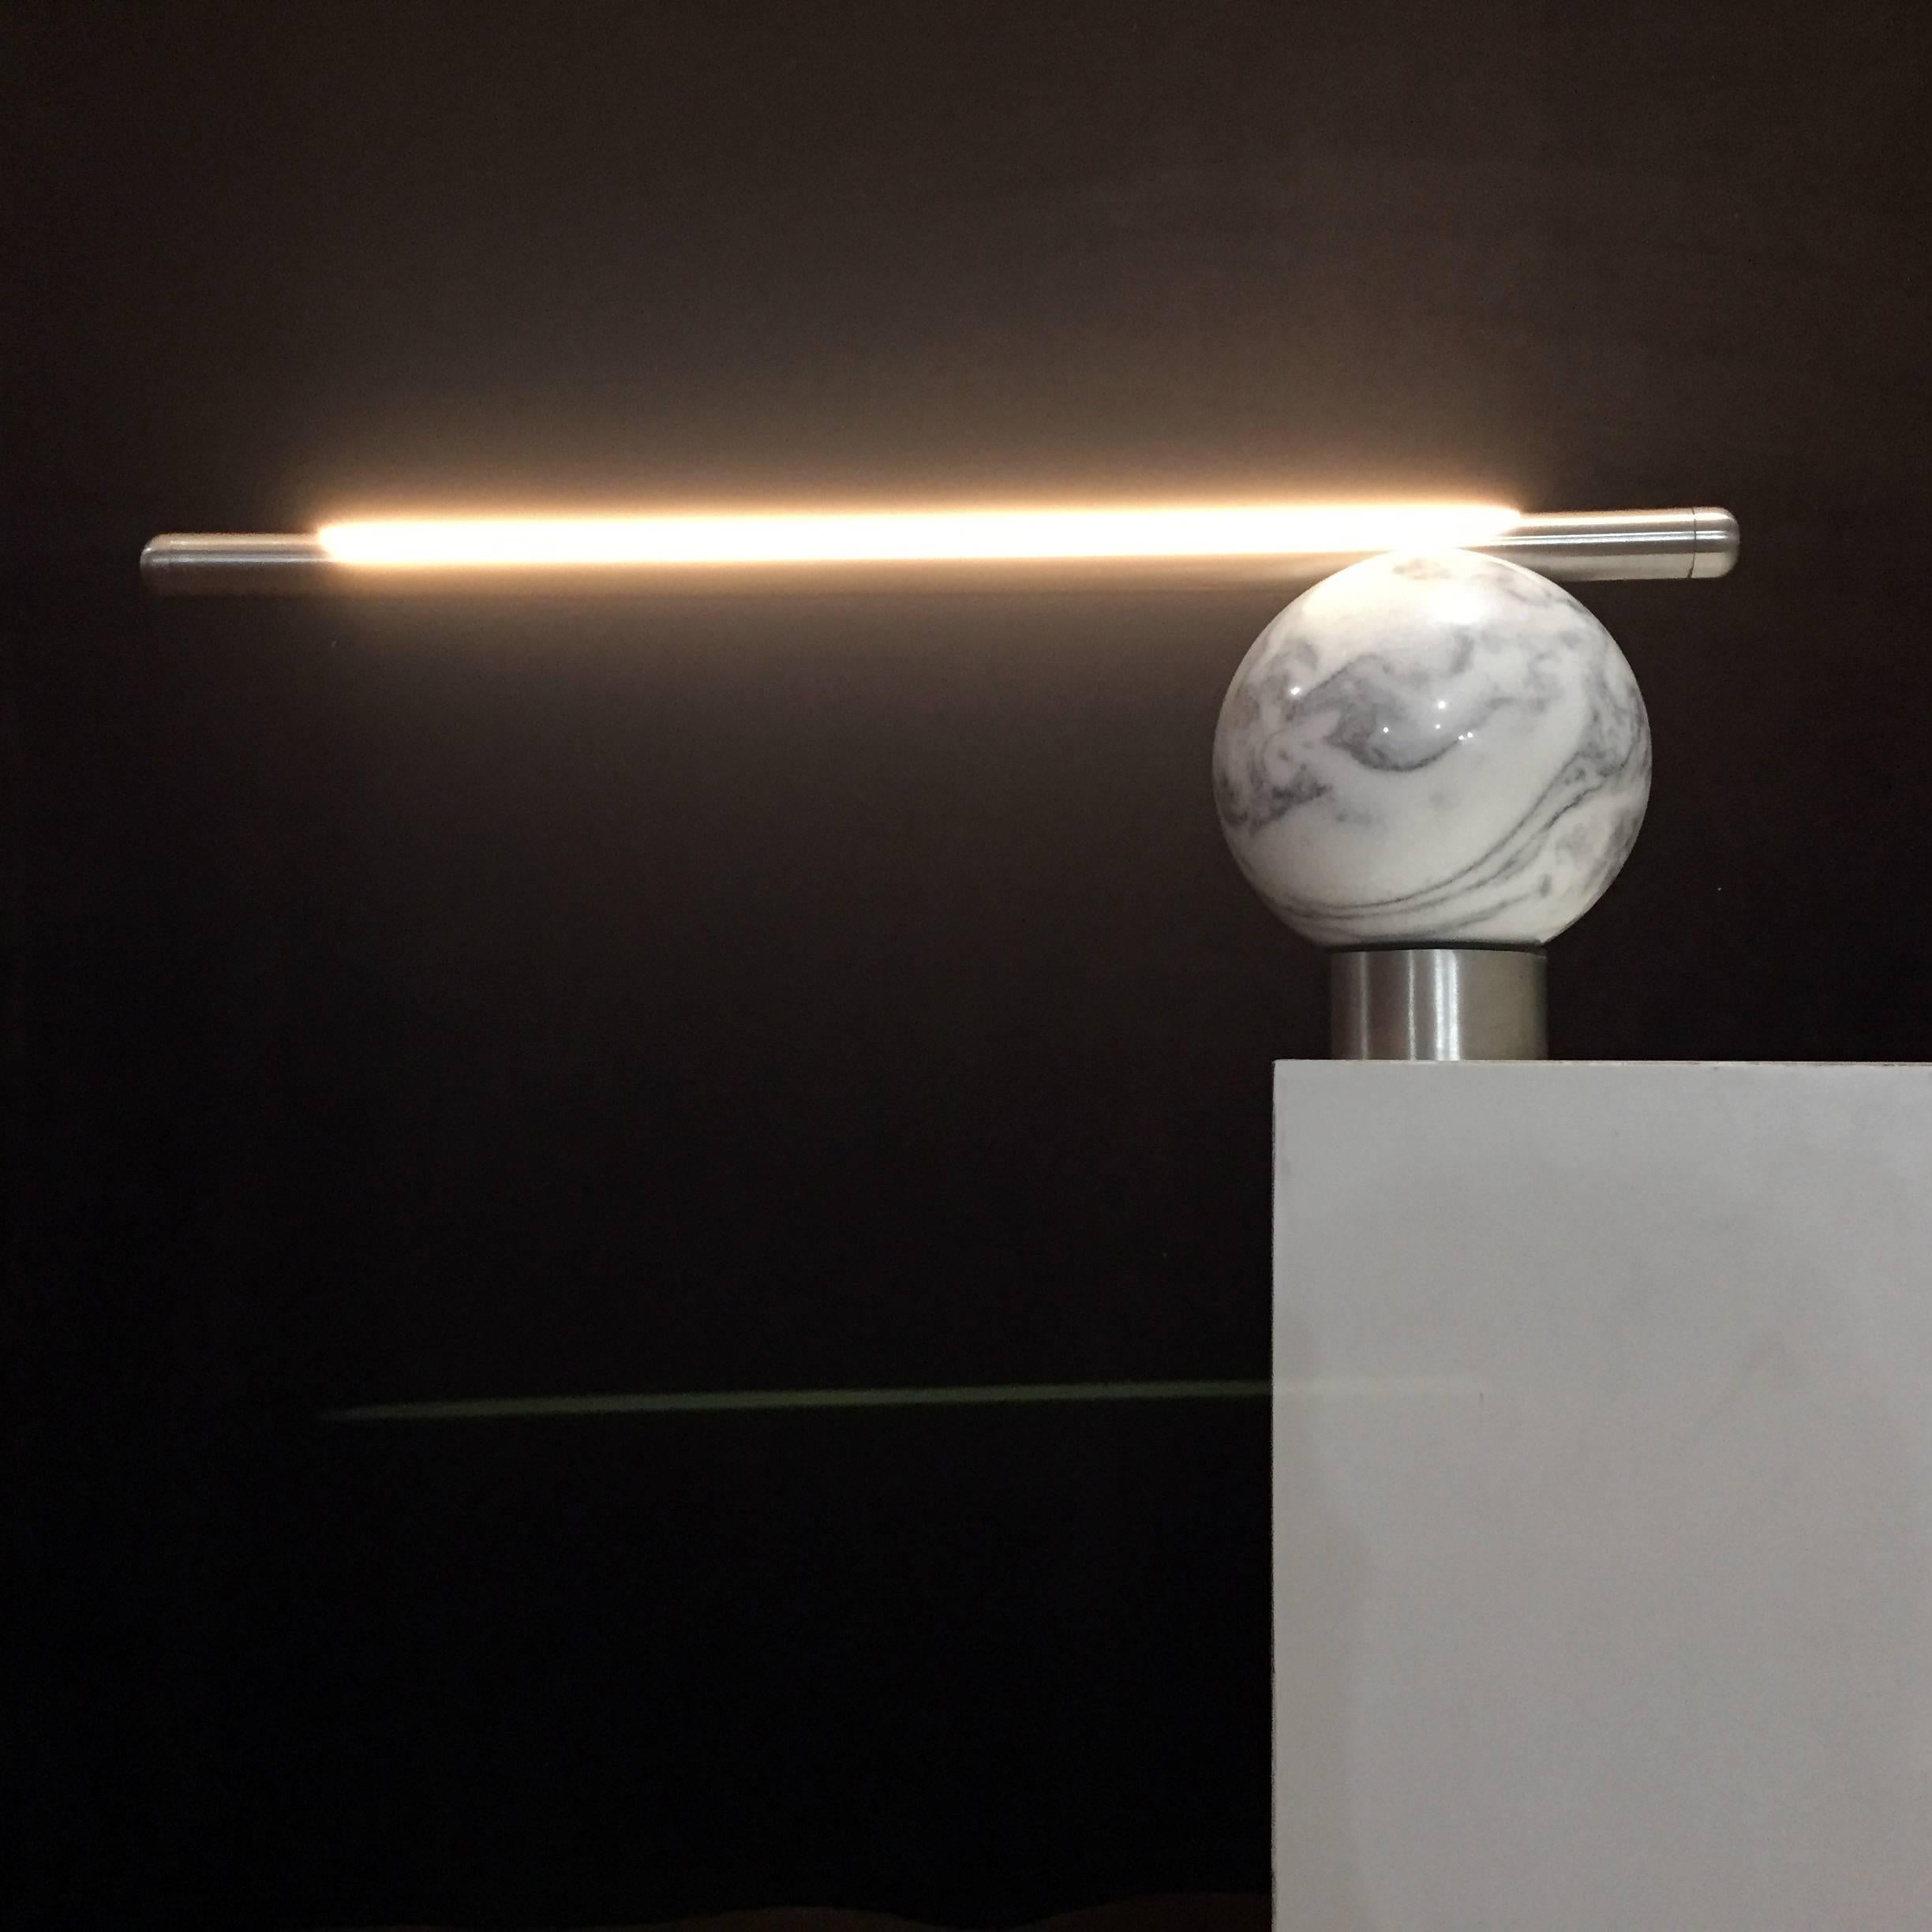 Polished 'Bubble' Table Lamp in Stainless Steel, Brazilian Contemporary Style